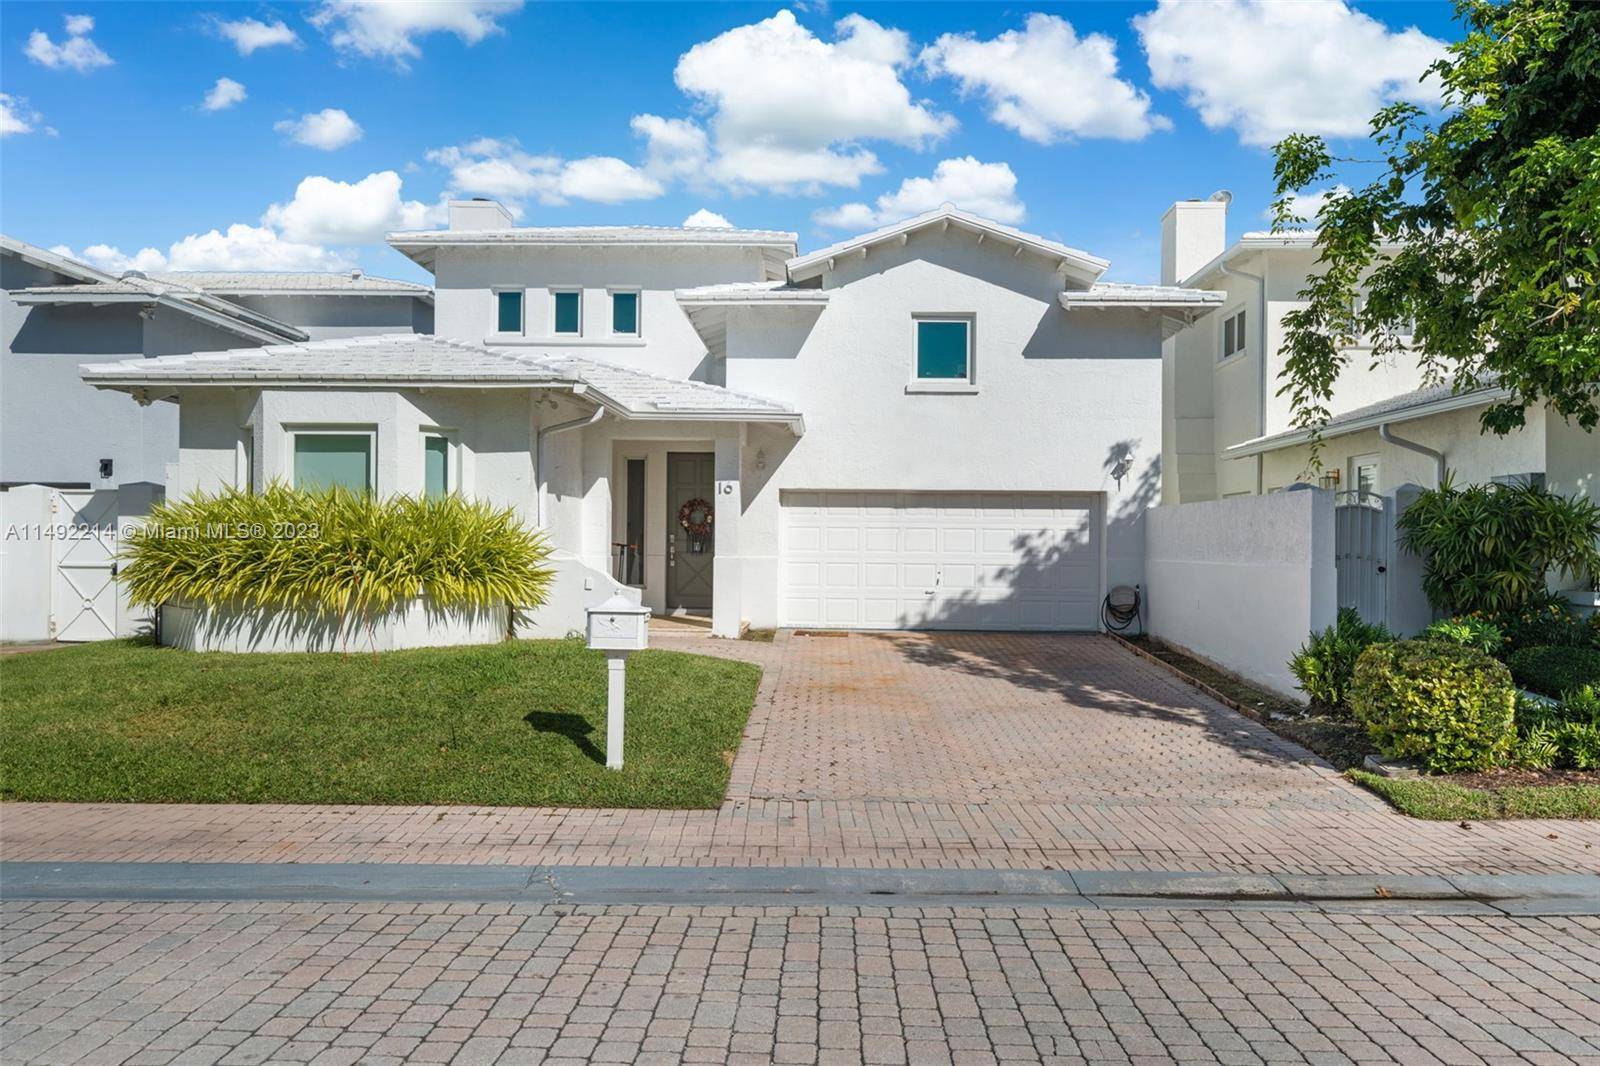 Paradise in Key Biscayne DREAM RENTAL Walking distance to the beach, extremely well appointed and decorated home.